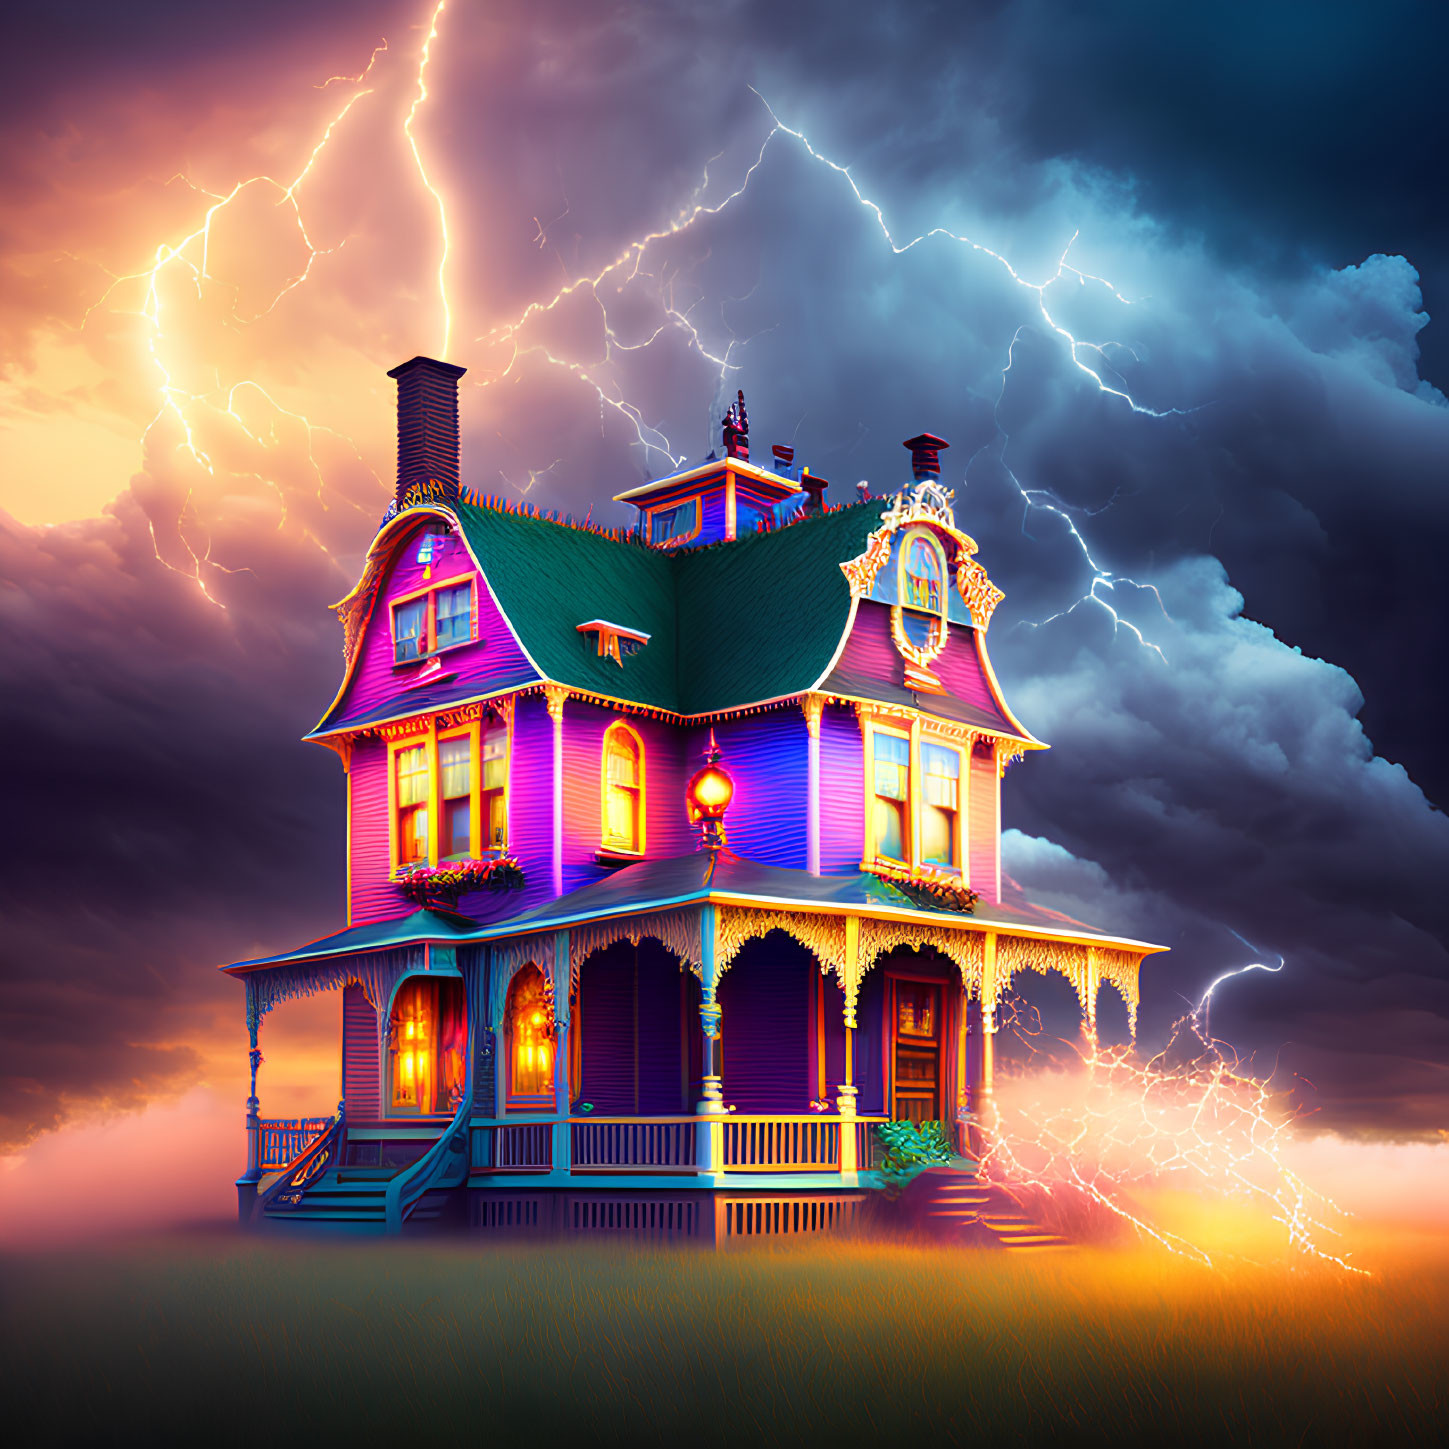 Victorian-style house illuminated in vibrant neon colors under stormy sky with lightning